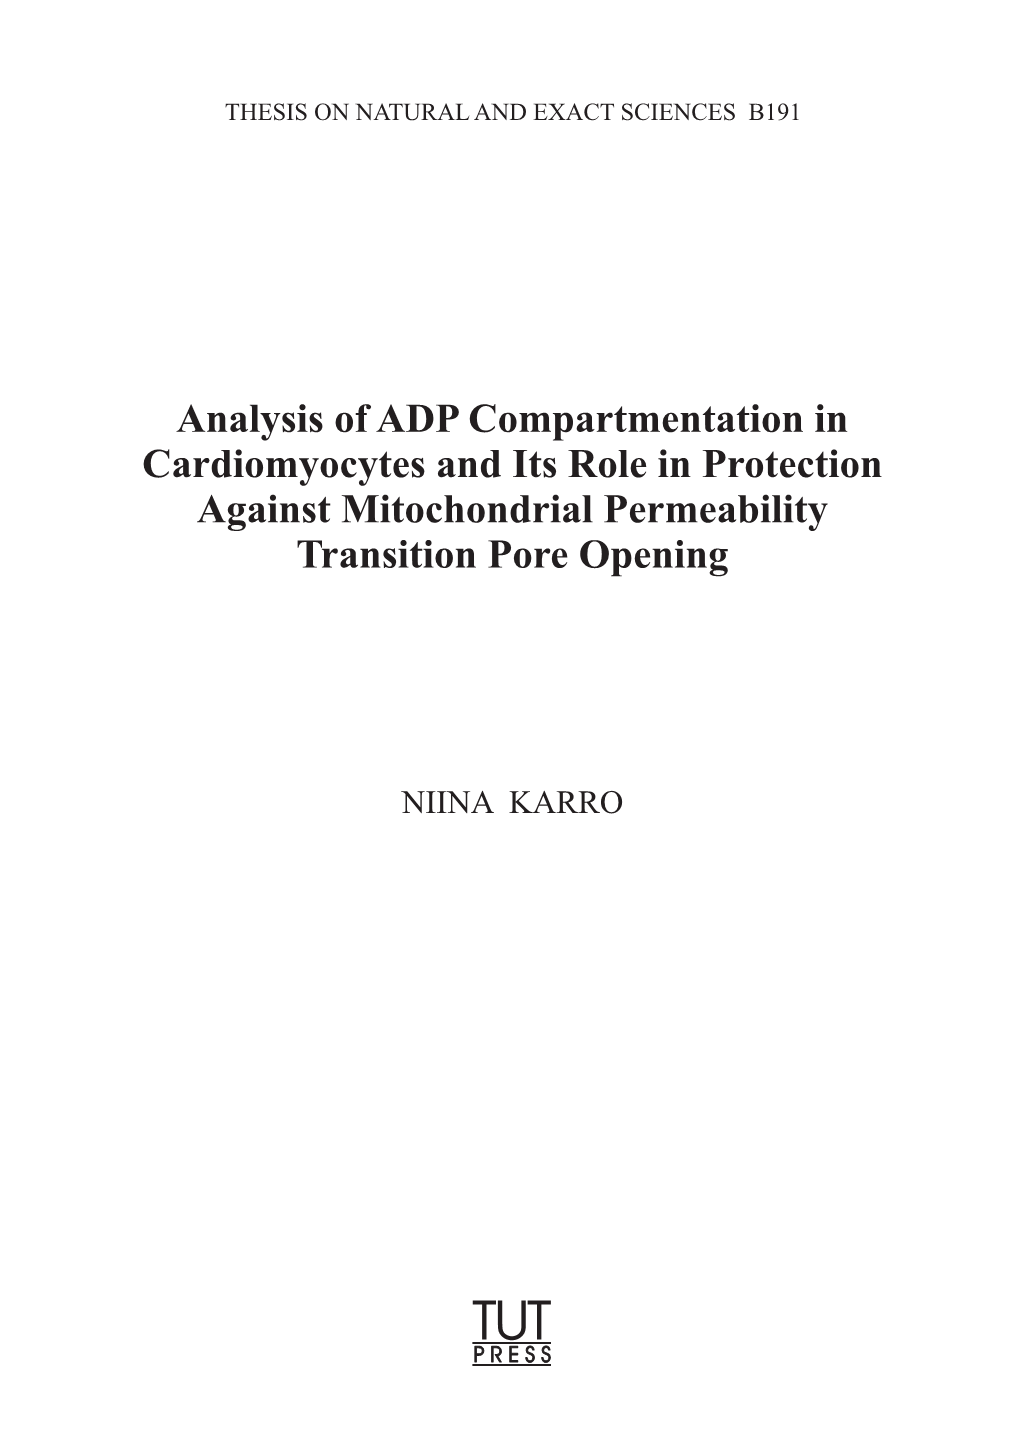 Analysis of ADP Compartmentation in Cardiomyocytes and Its Role in Protection Against Mitochondrial Permeability Transition Pore Opening